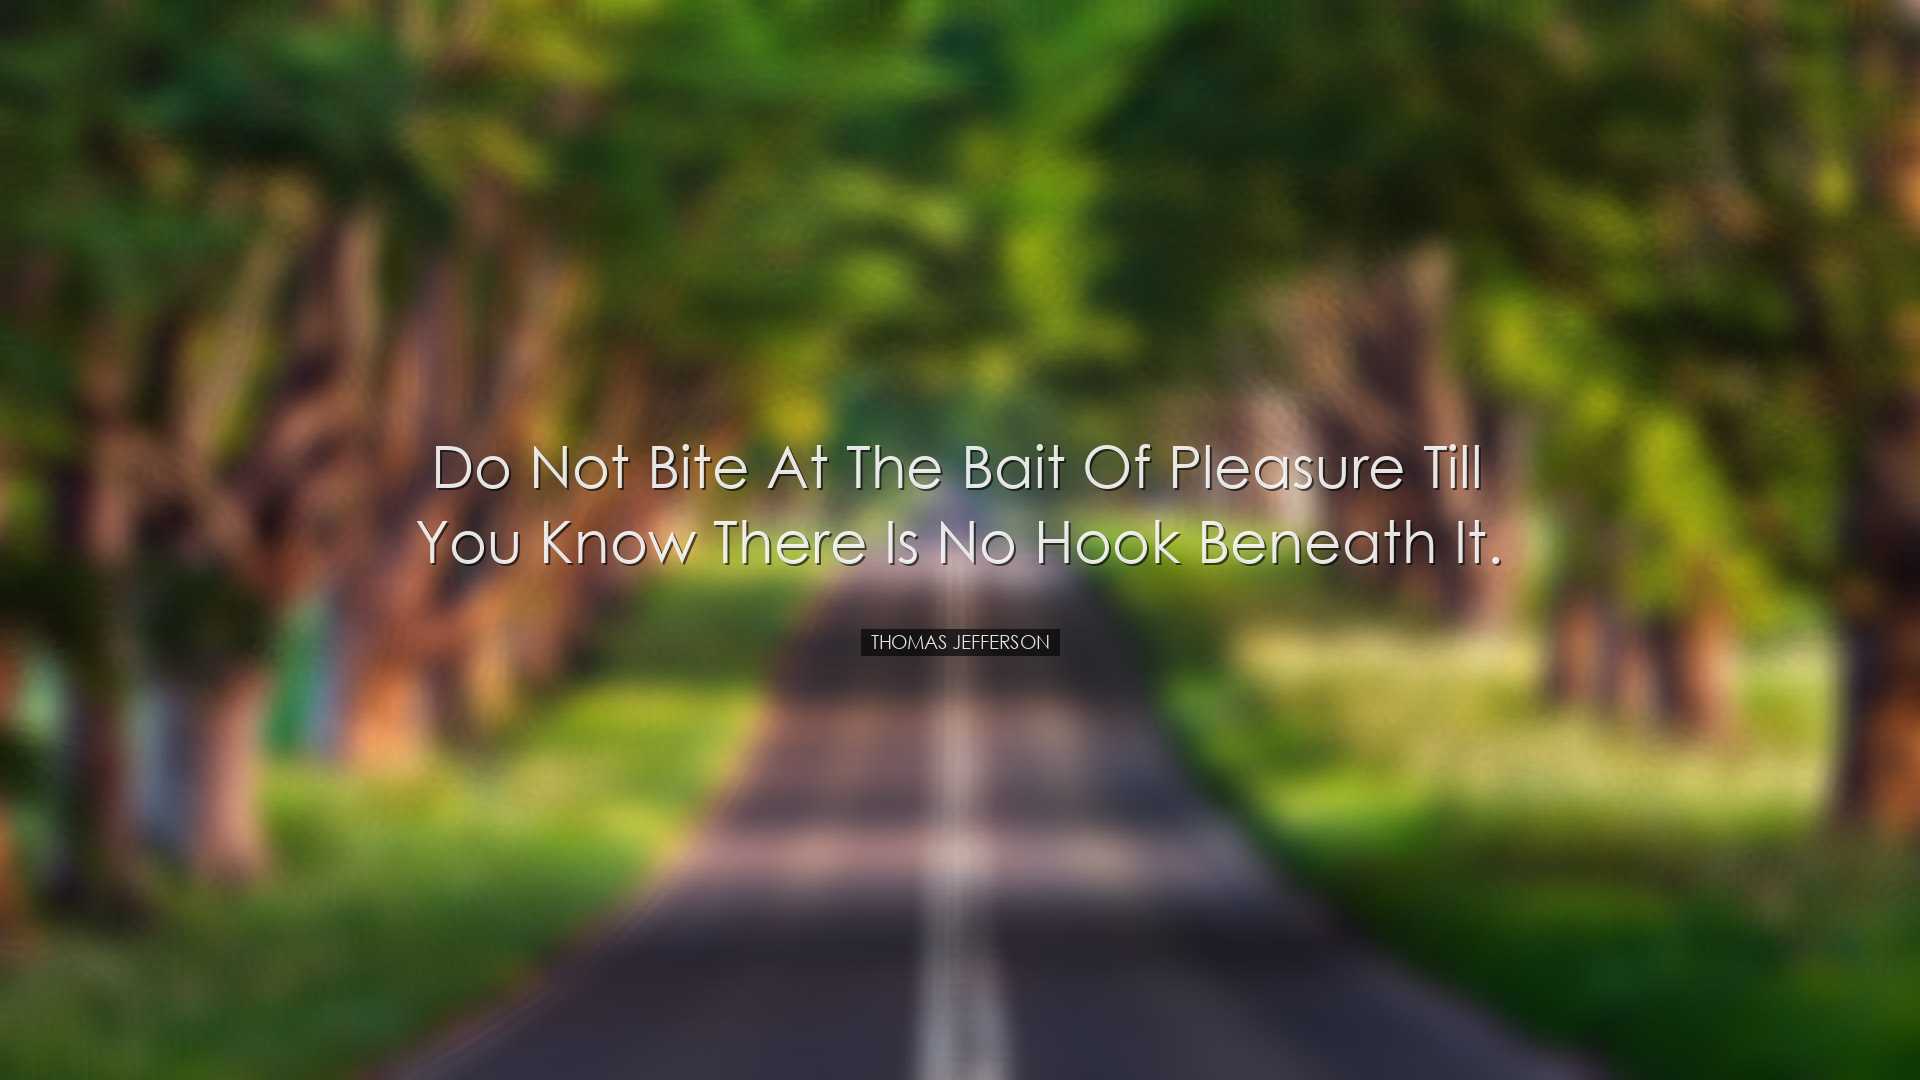 Do not bite at the bait of pleasure till you know there is no hook